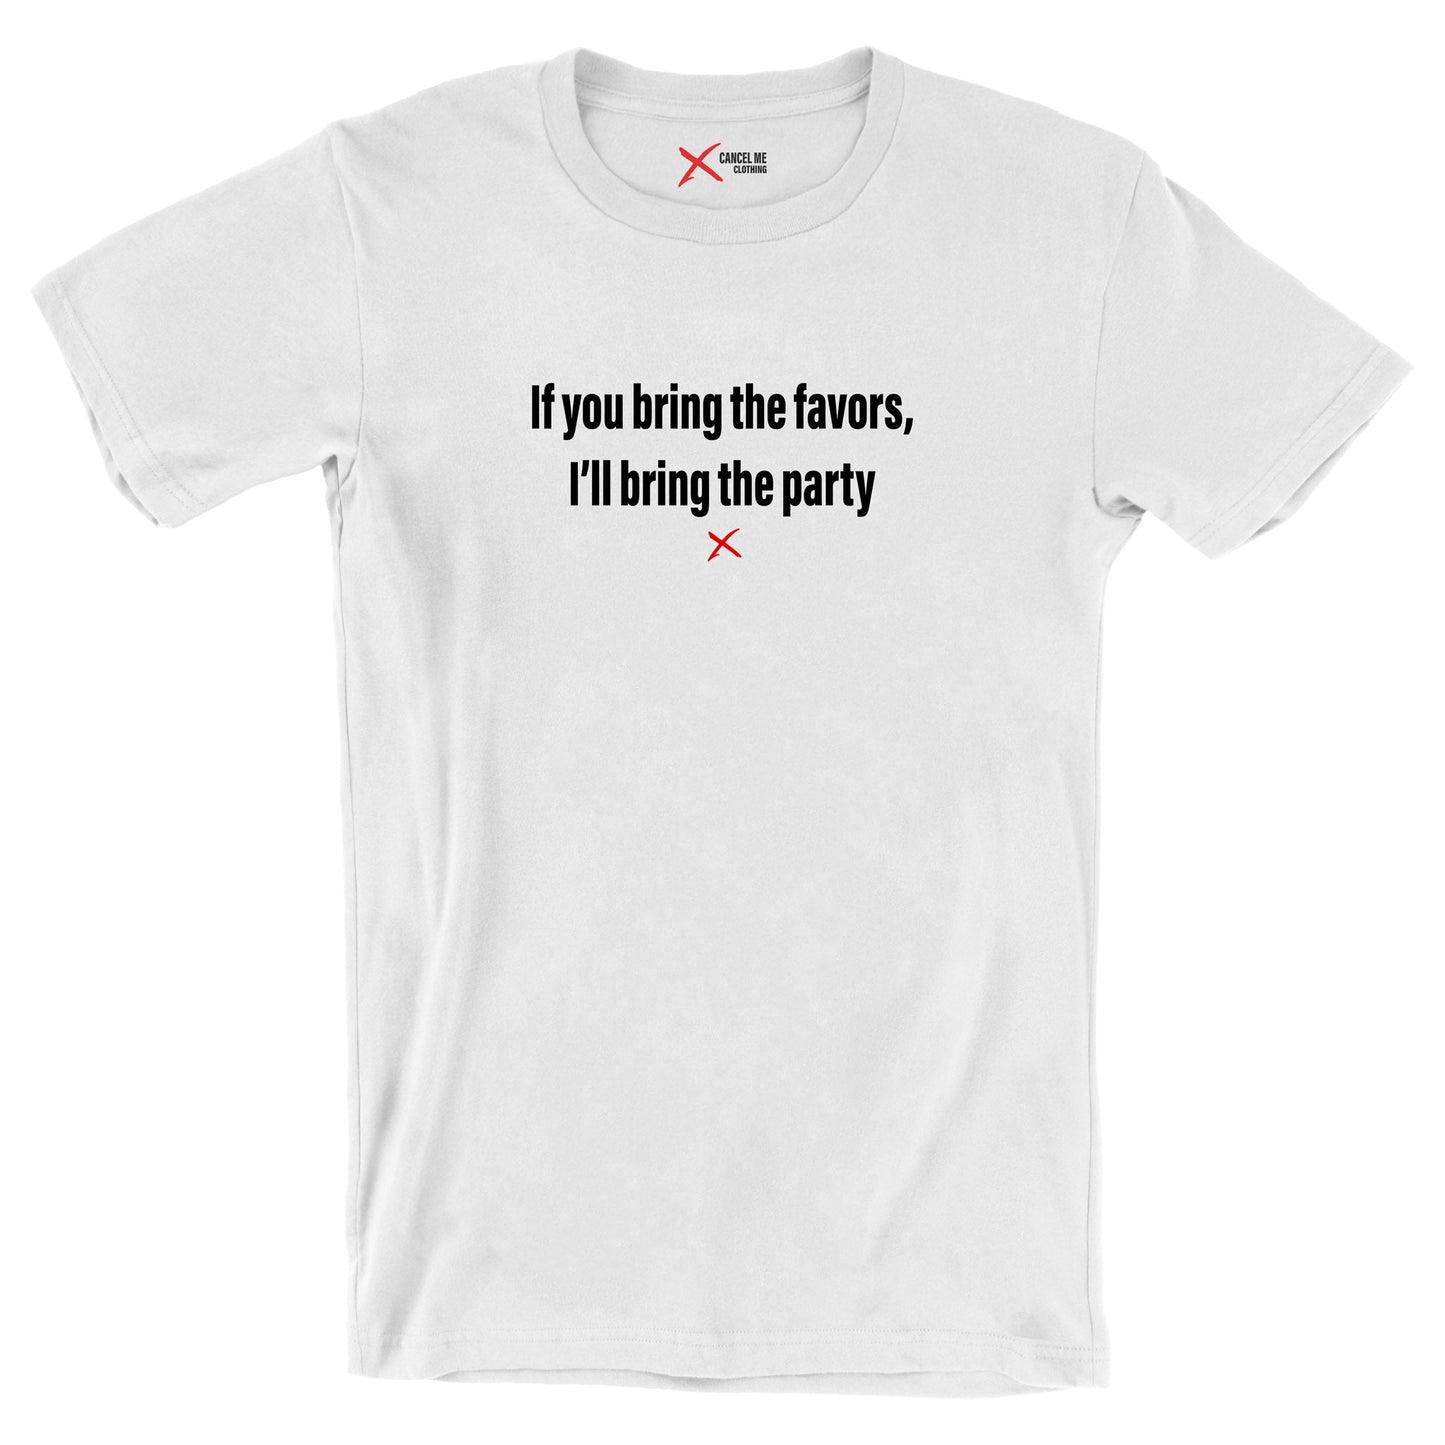 If you bring the favors, I'll bring the party - Shirt